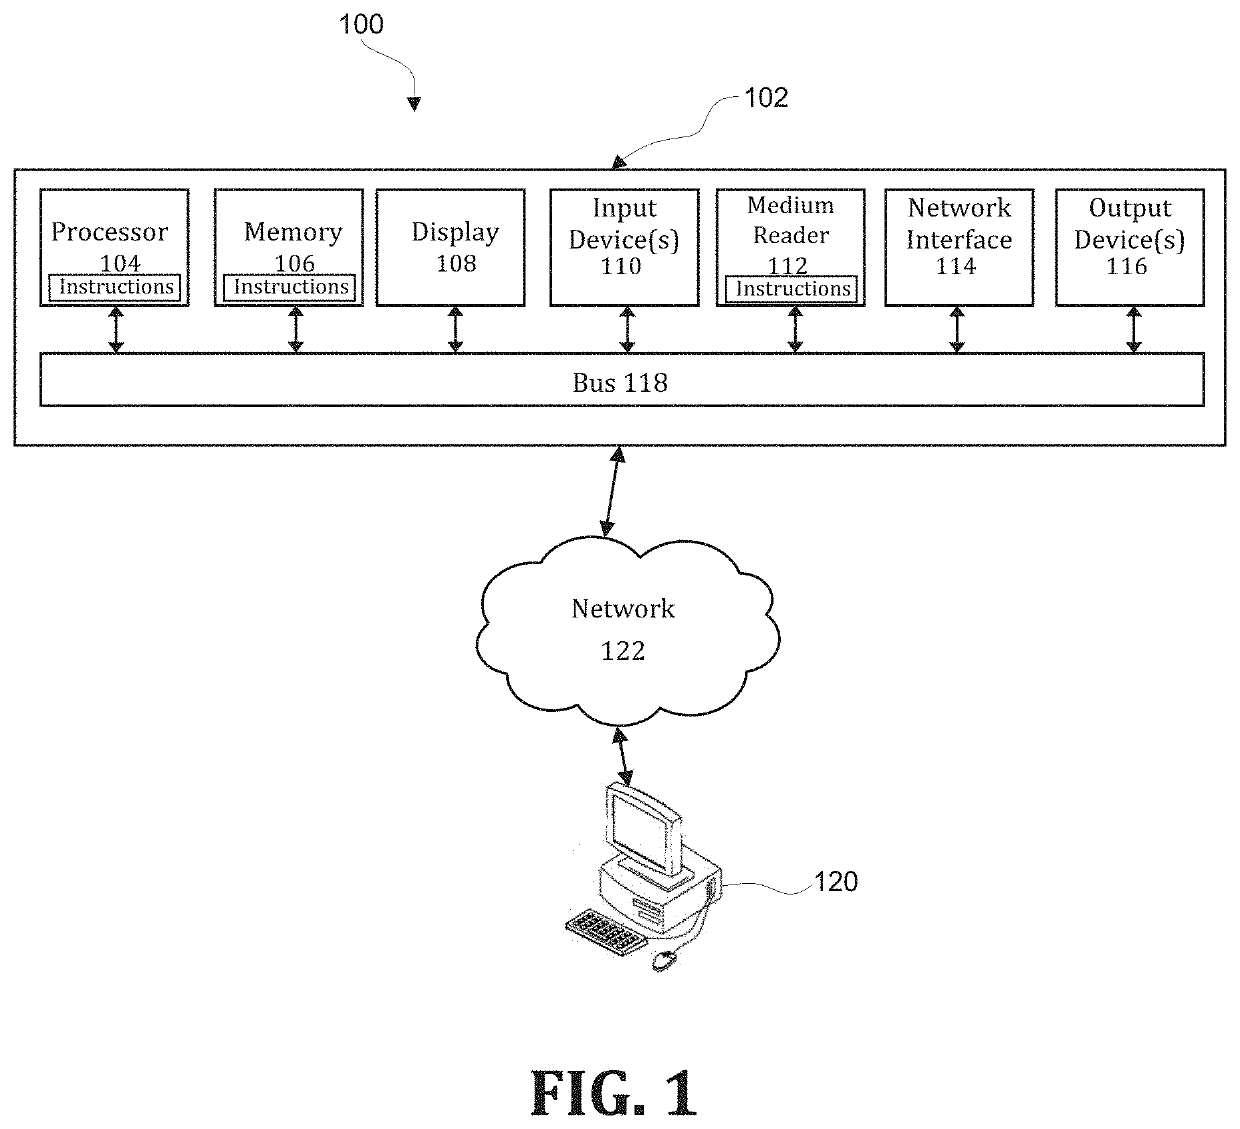 Method and system for low density hosted telephony regulatory compliance